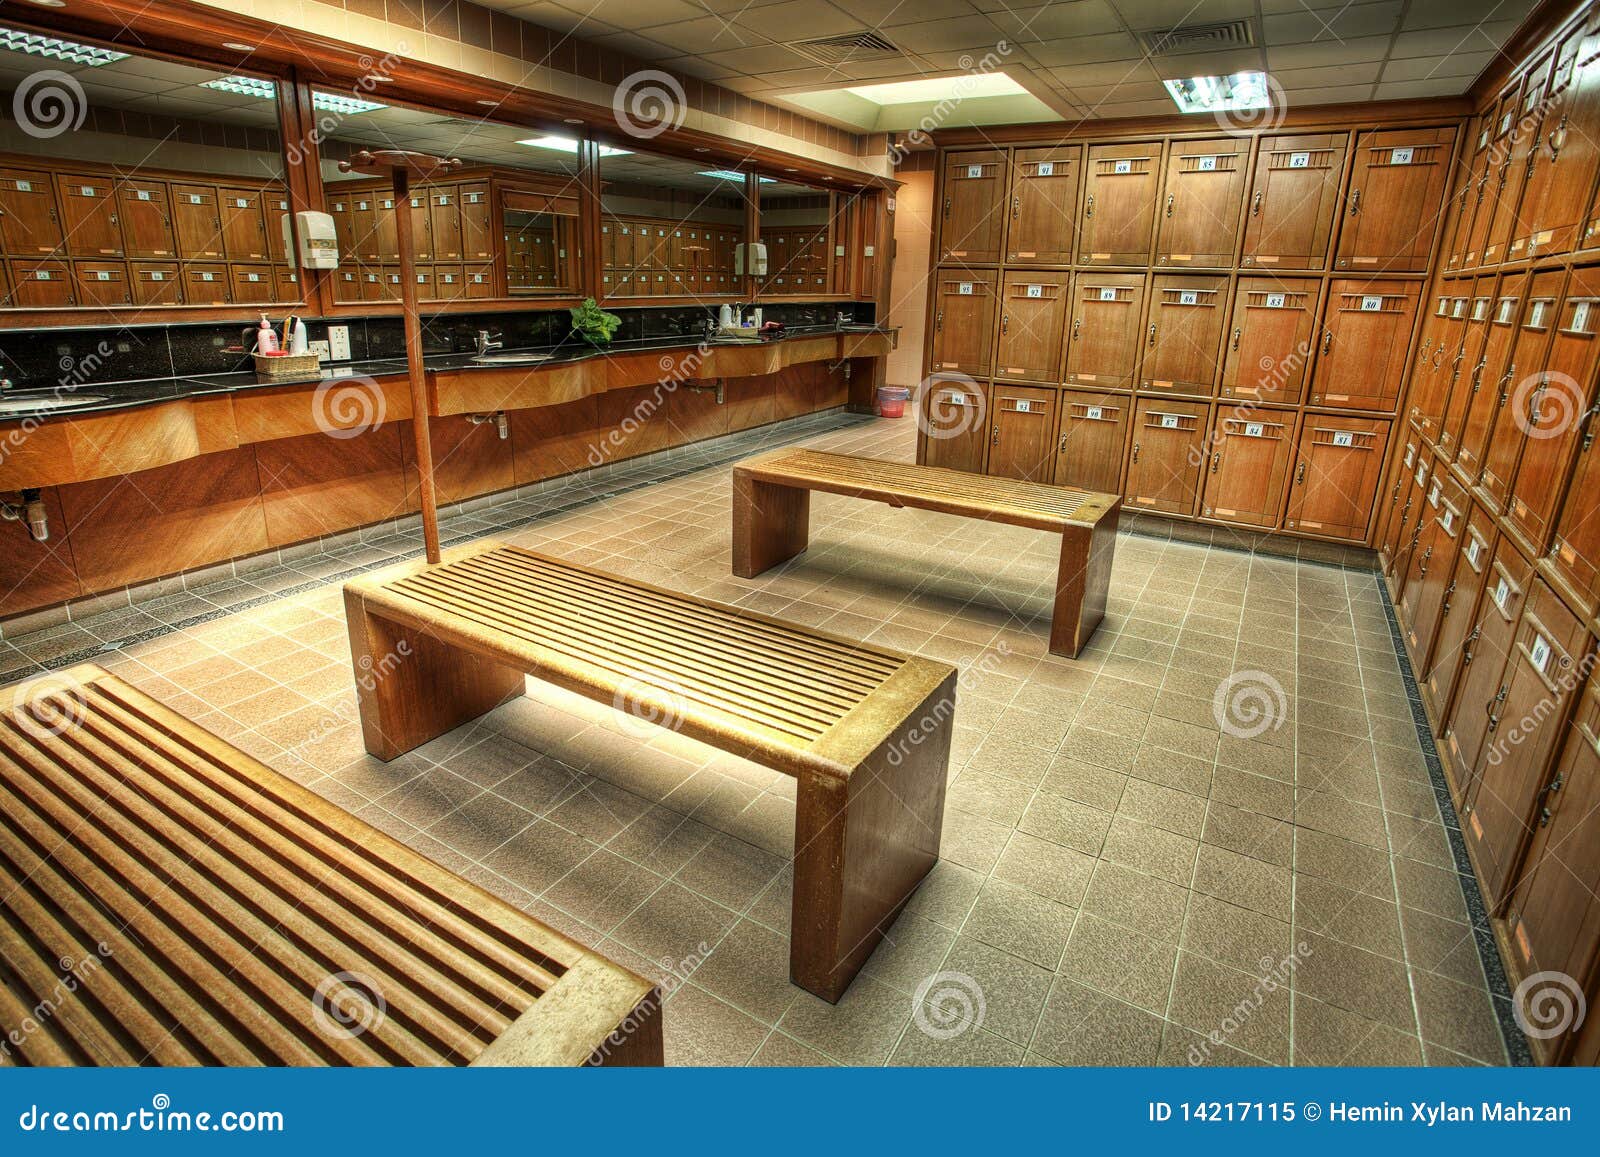 Country Club Locker Room Benches